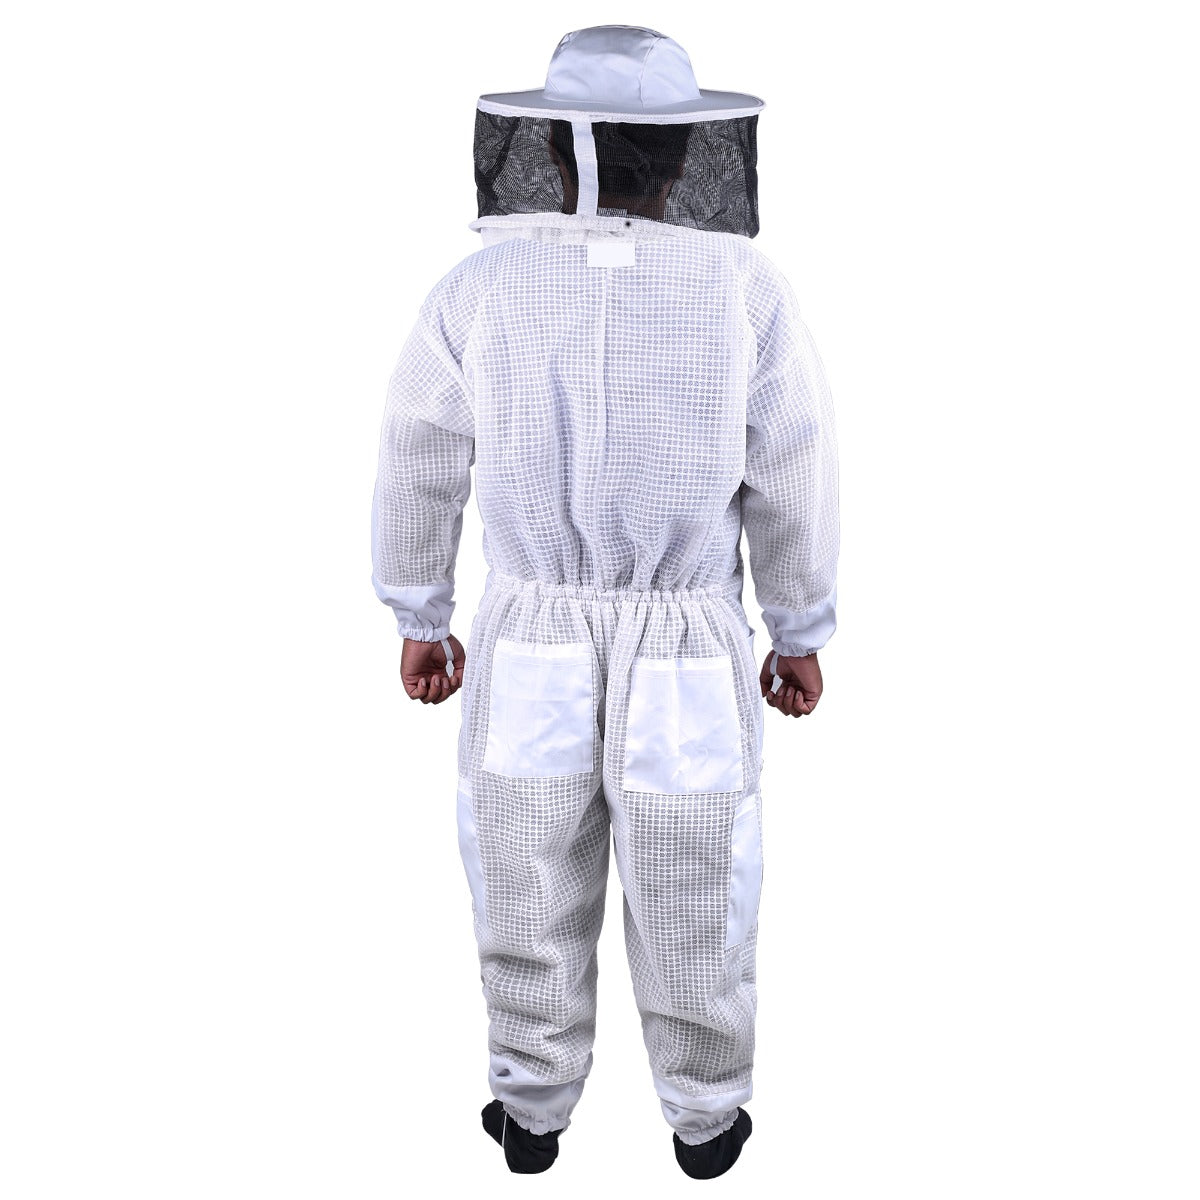 Full Suit 3 Layer Mesh Ultra Cool Ventilated Round Head Beekeeping Size M